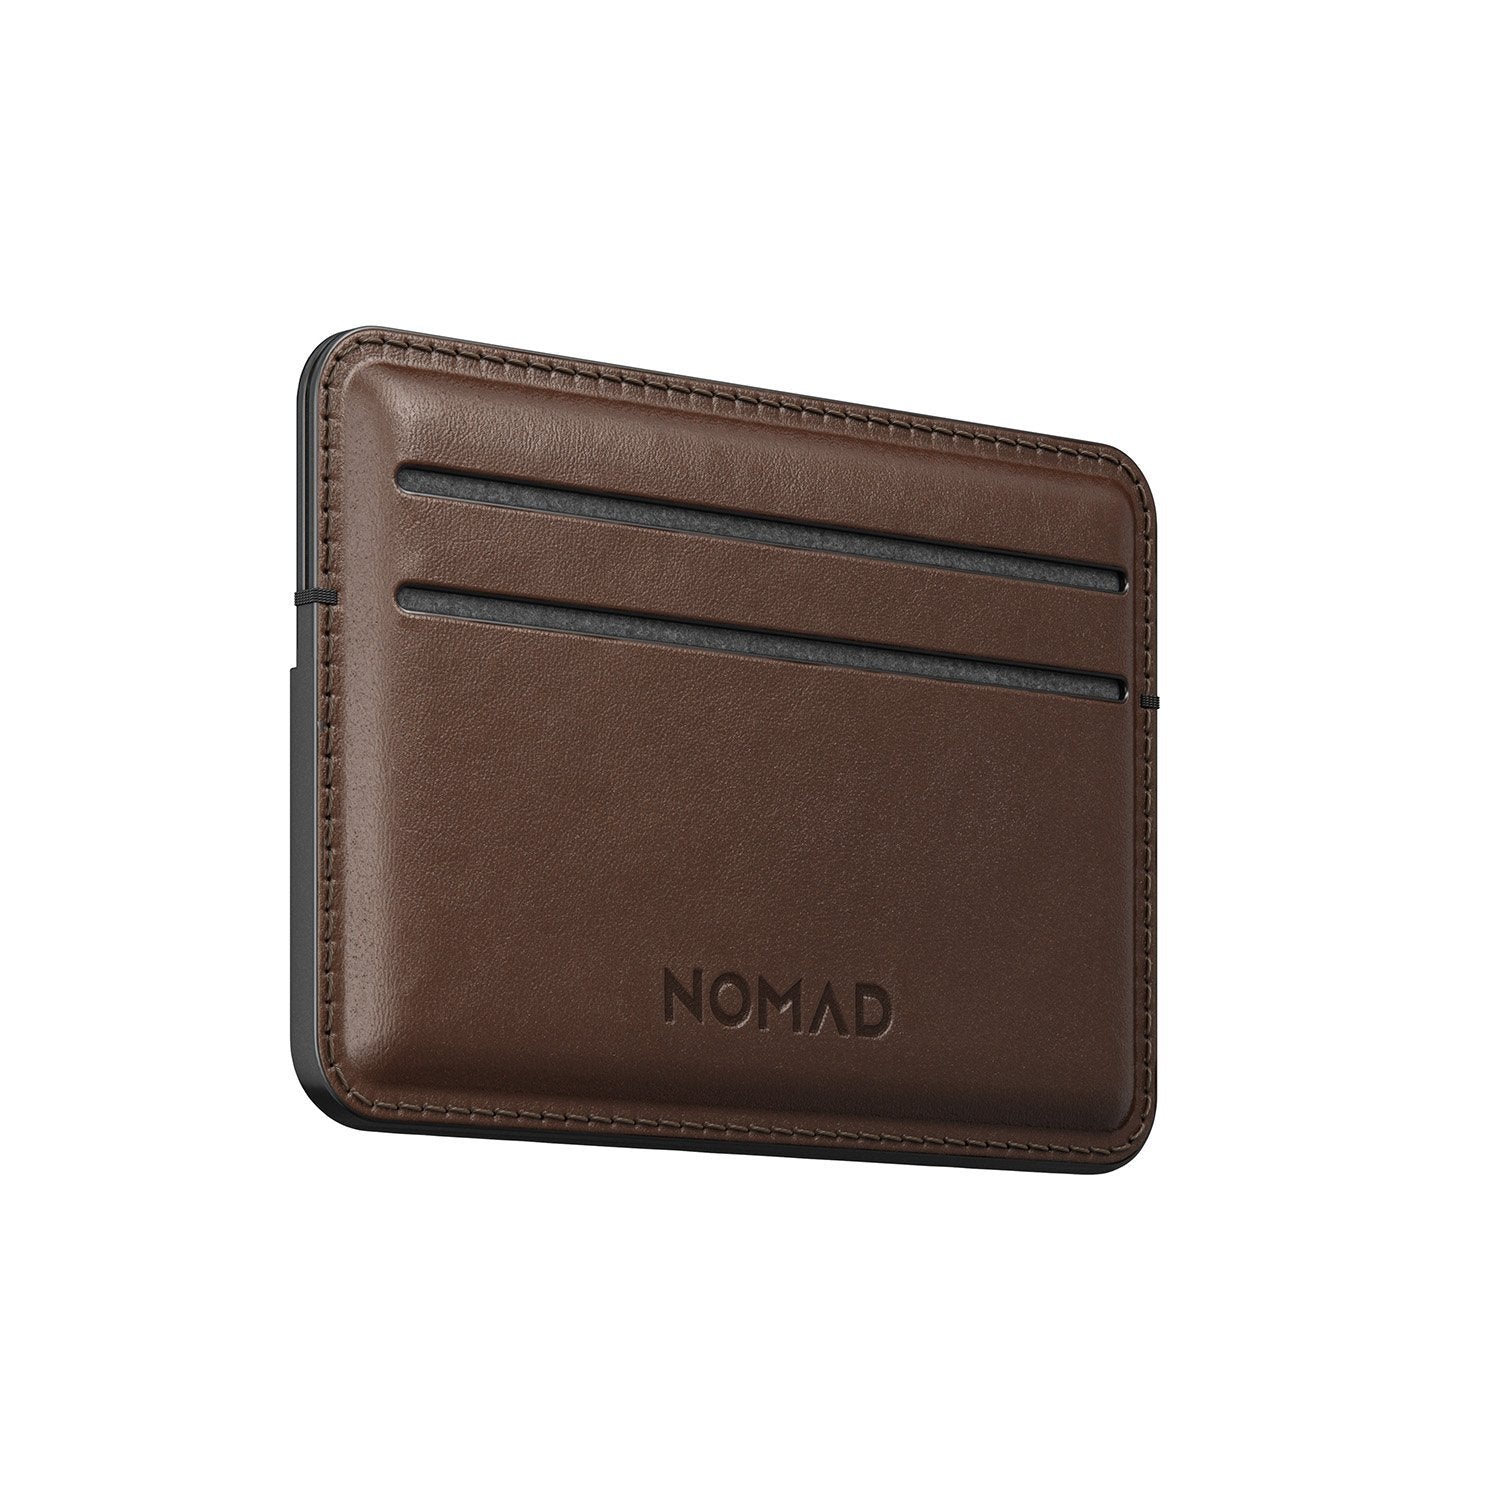 Nomad Horween Leather Card Wallet, Rustic Brown Card Wallet NOMAD 